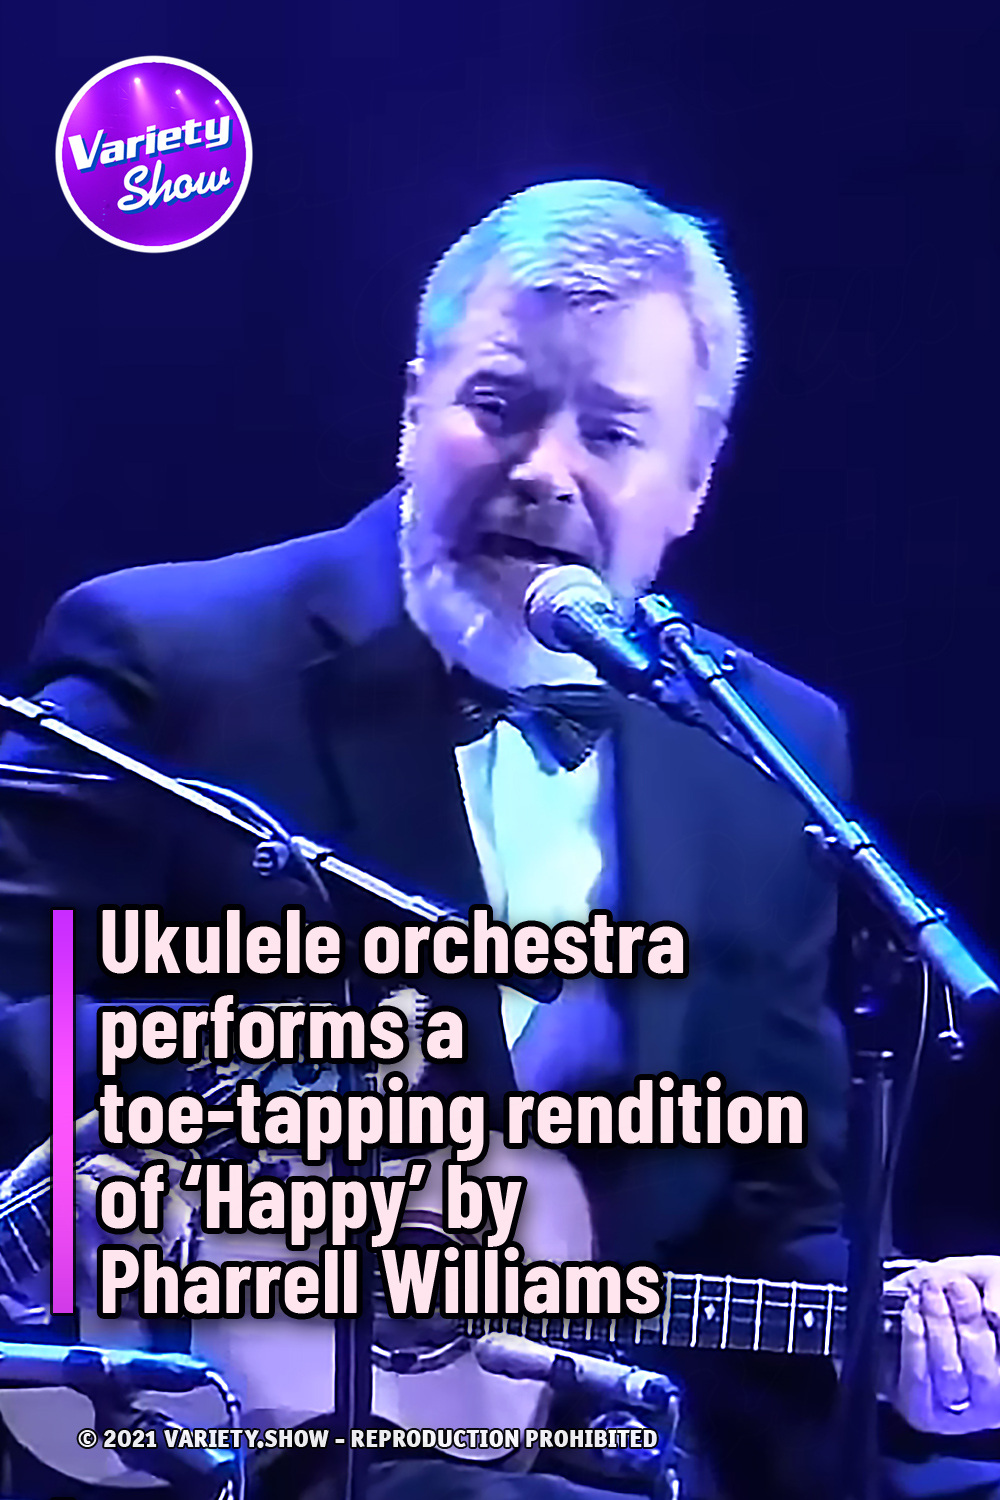 Ukulele orchestra performs a toe-tapping rendition of ‘Happy’ by Pharrell Williams